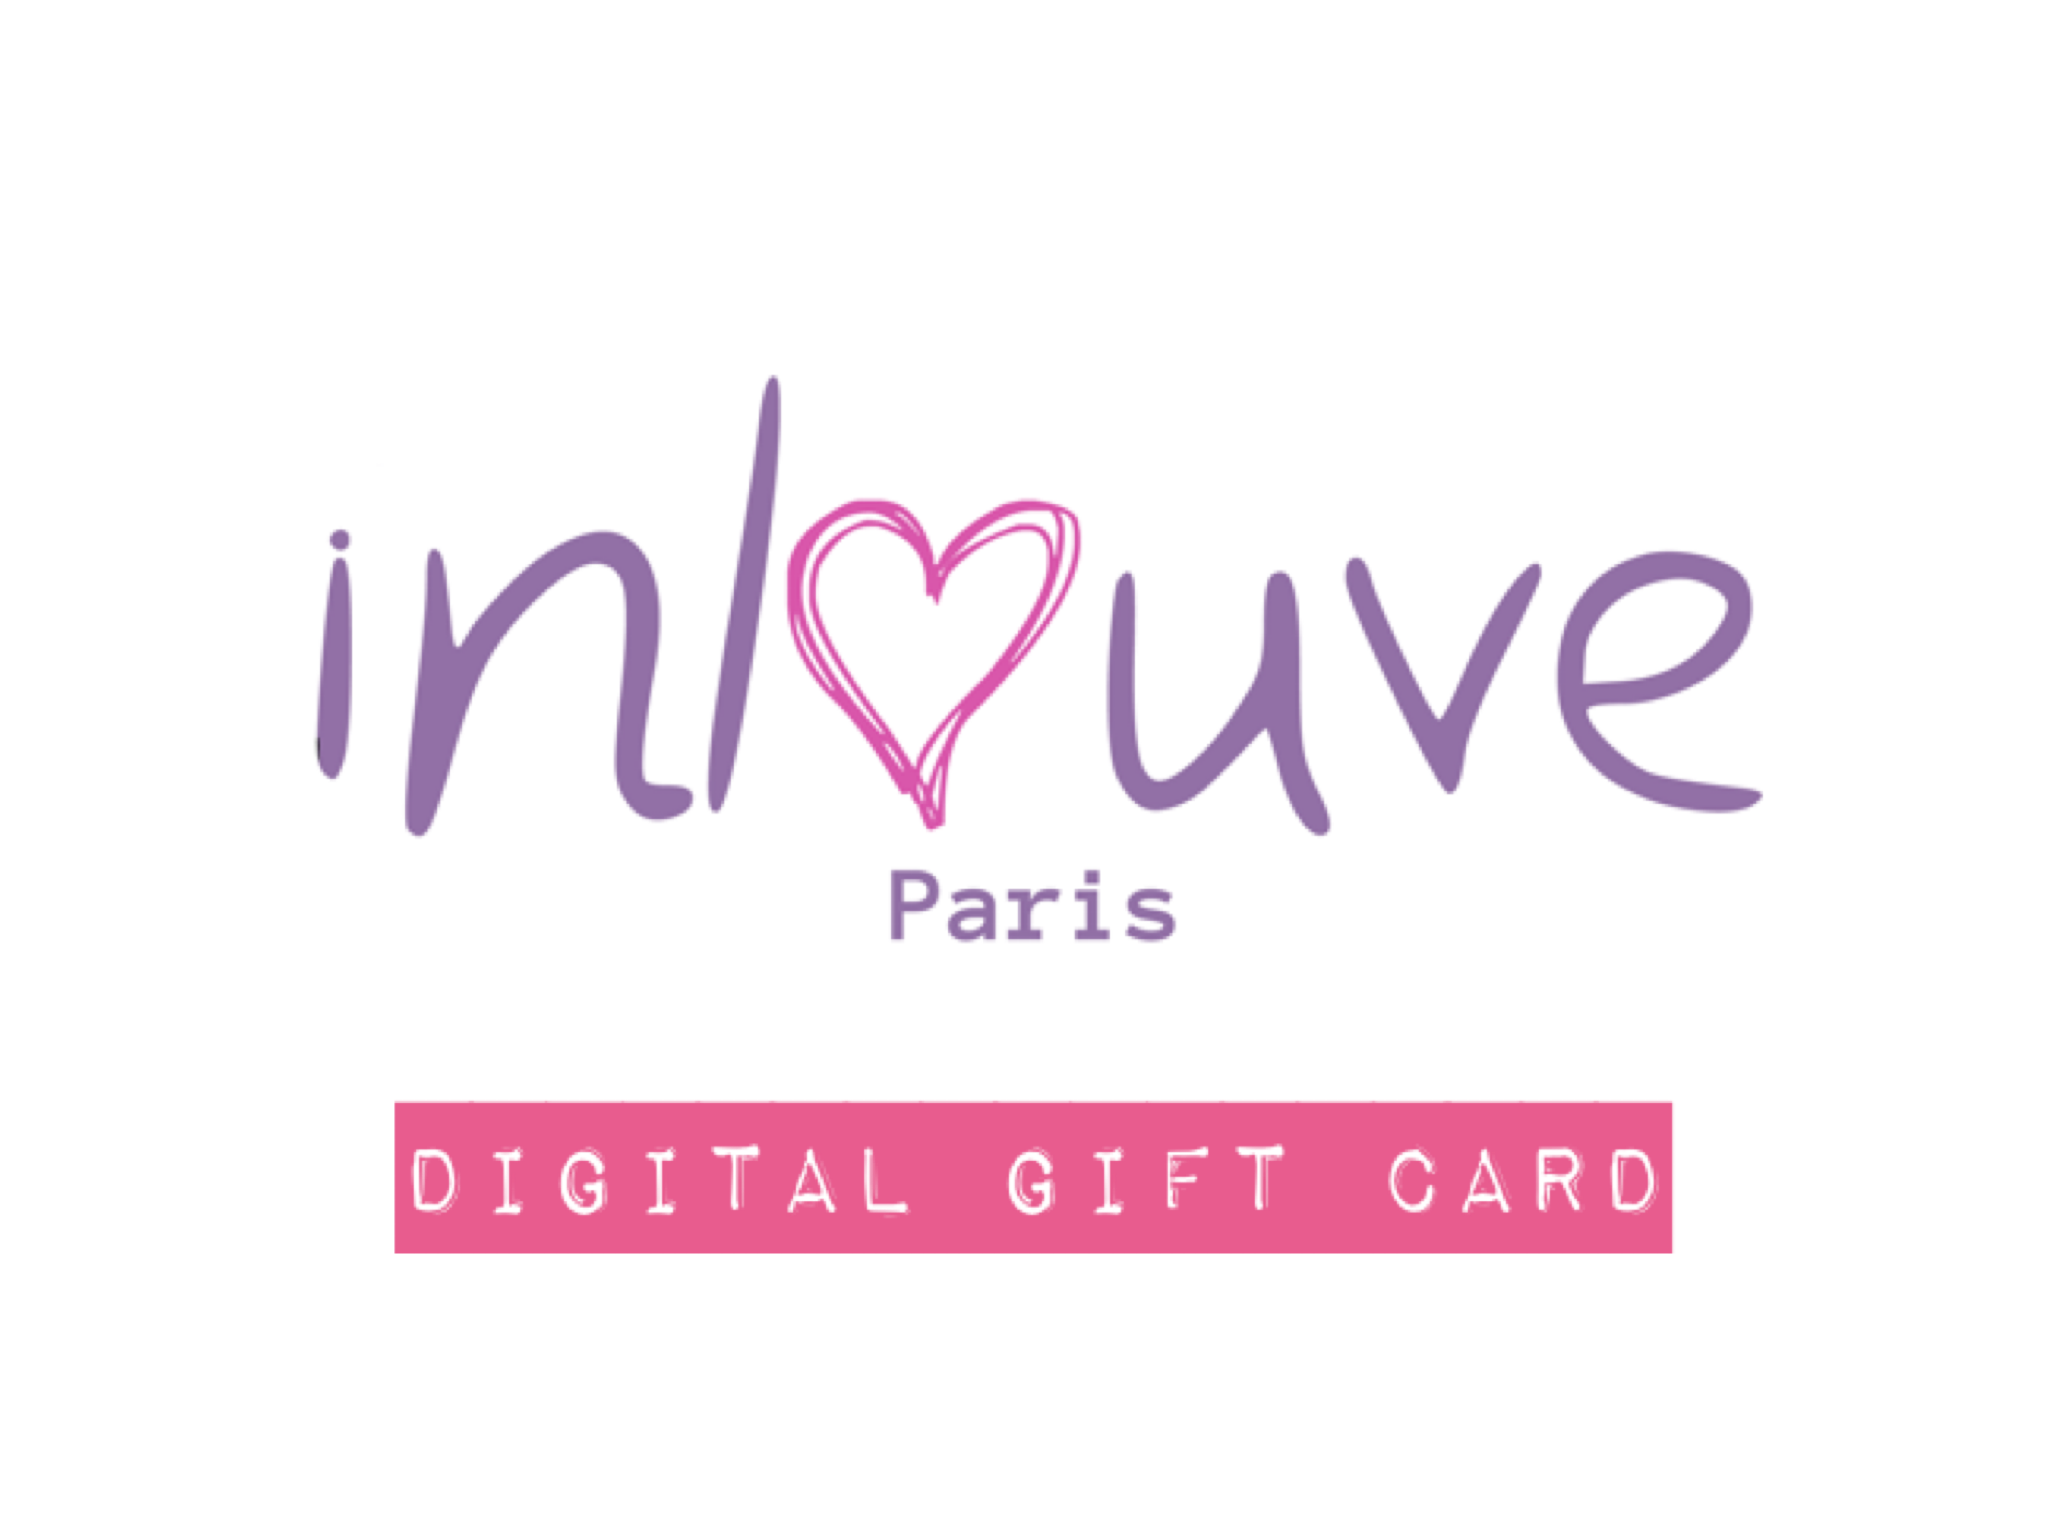 InLouve's Gift Card